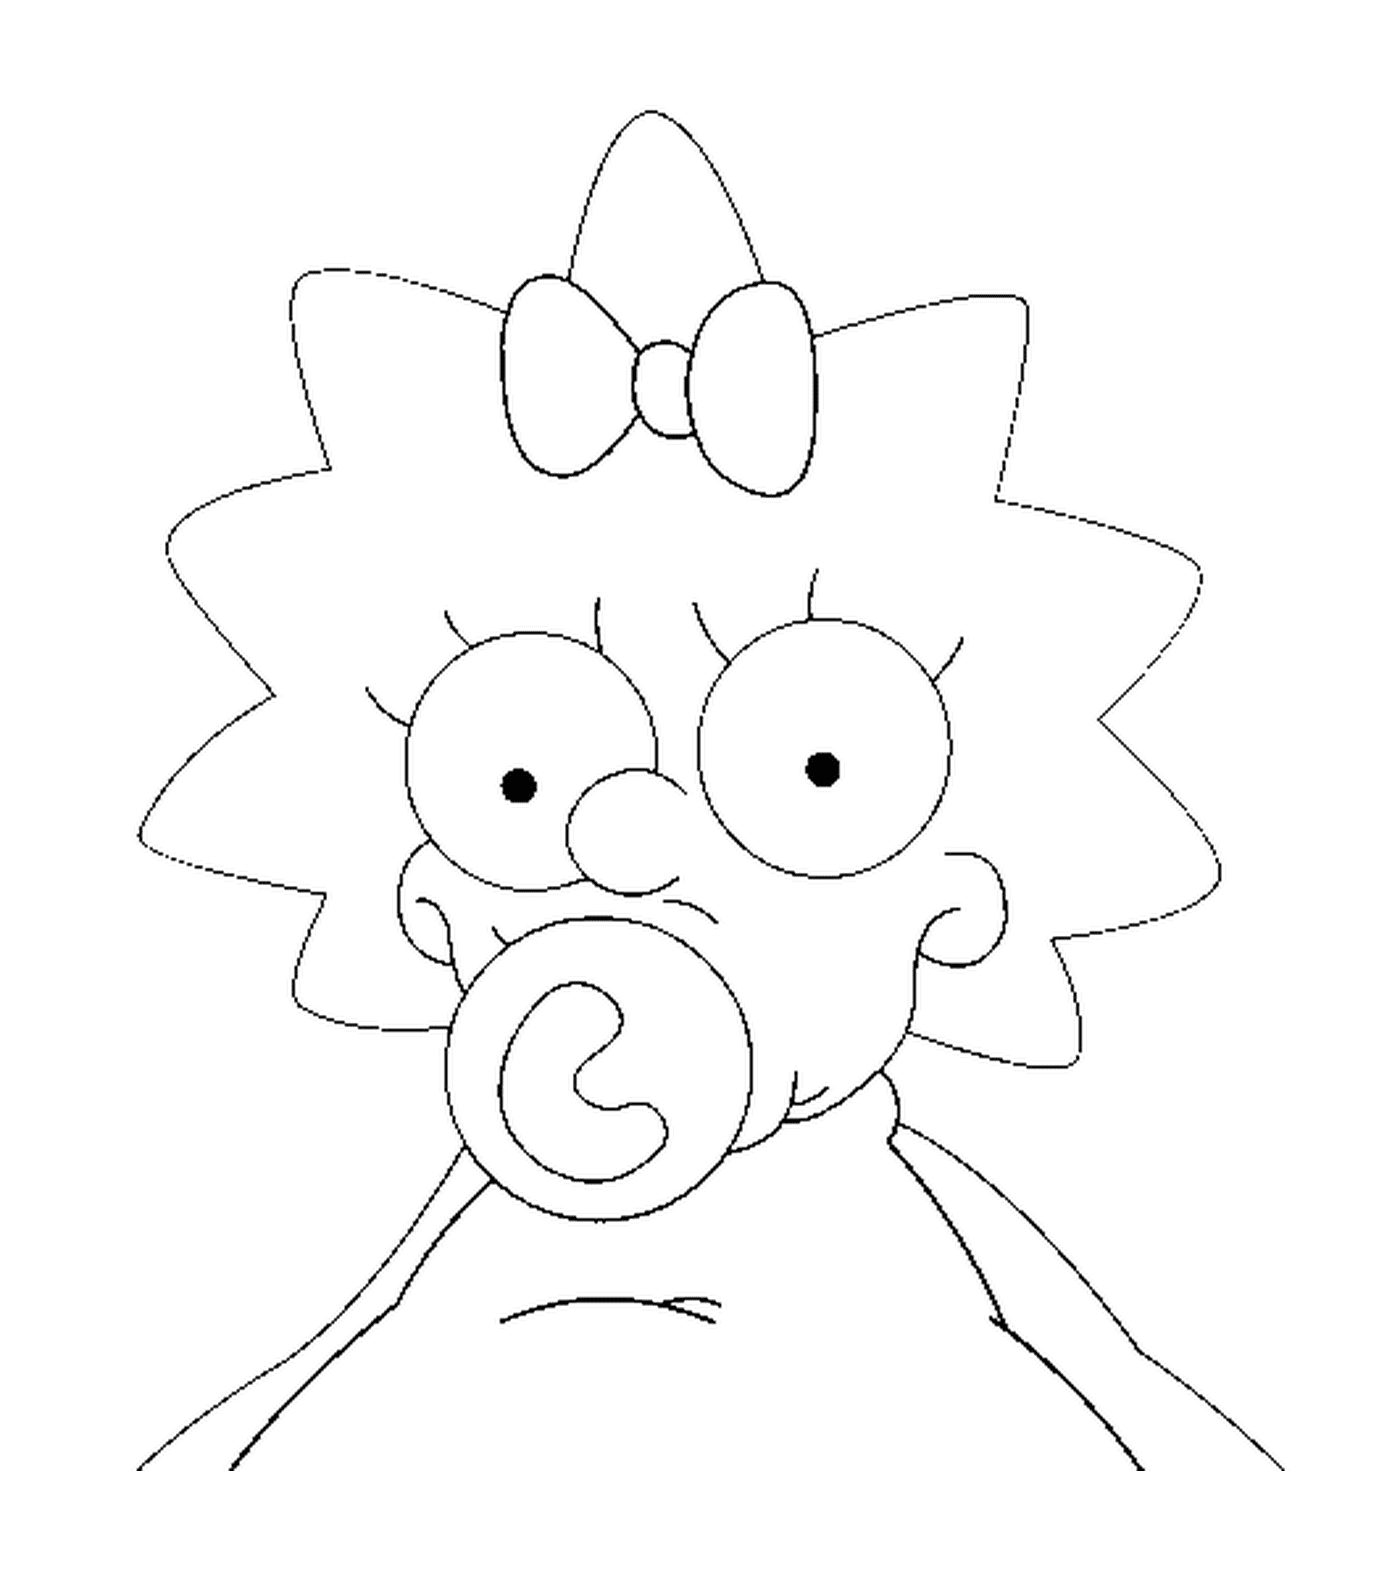  Maggie Simpson, adorable baby 